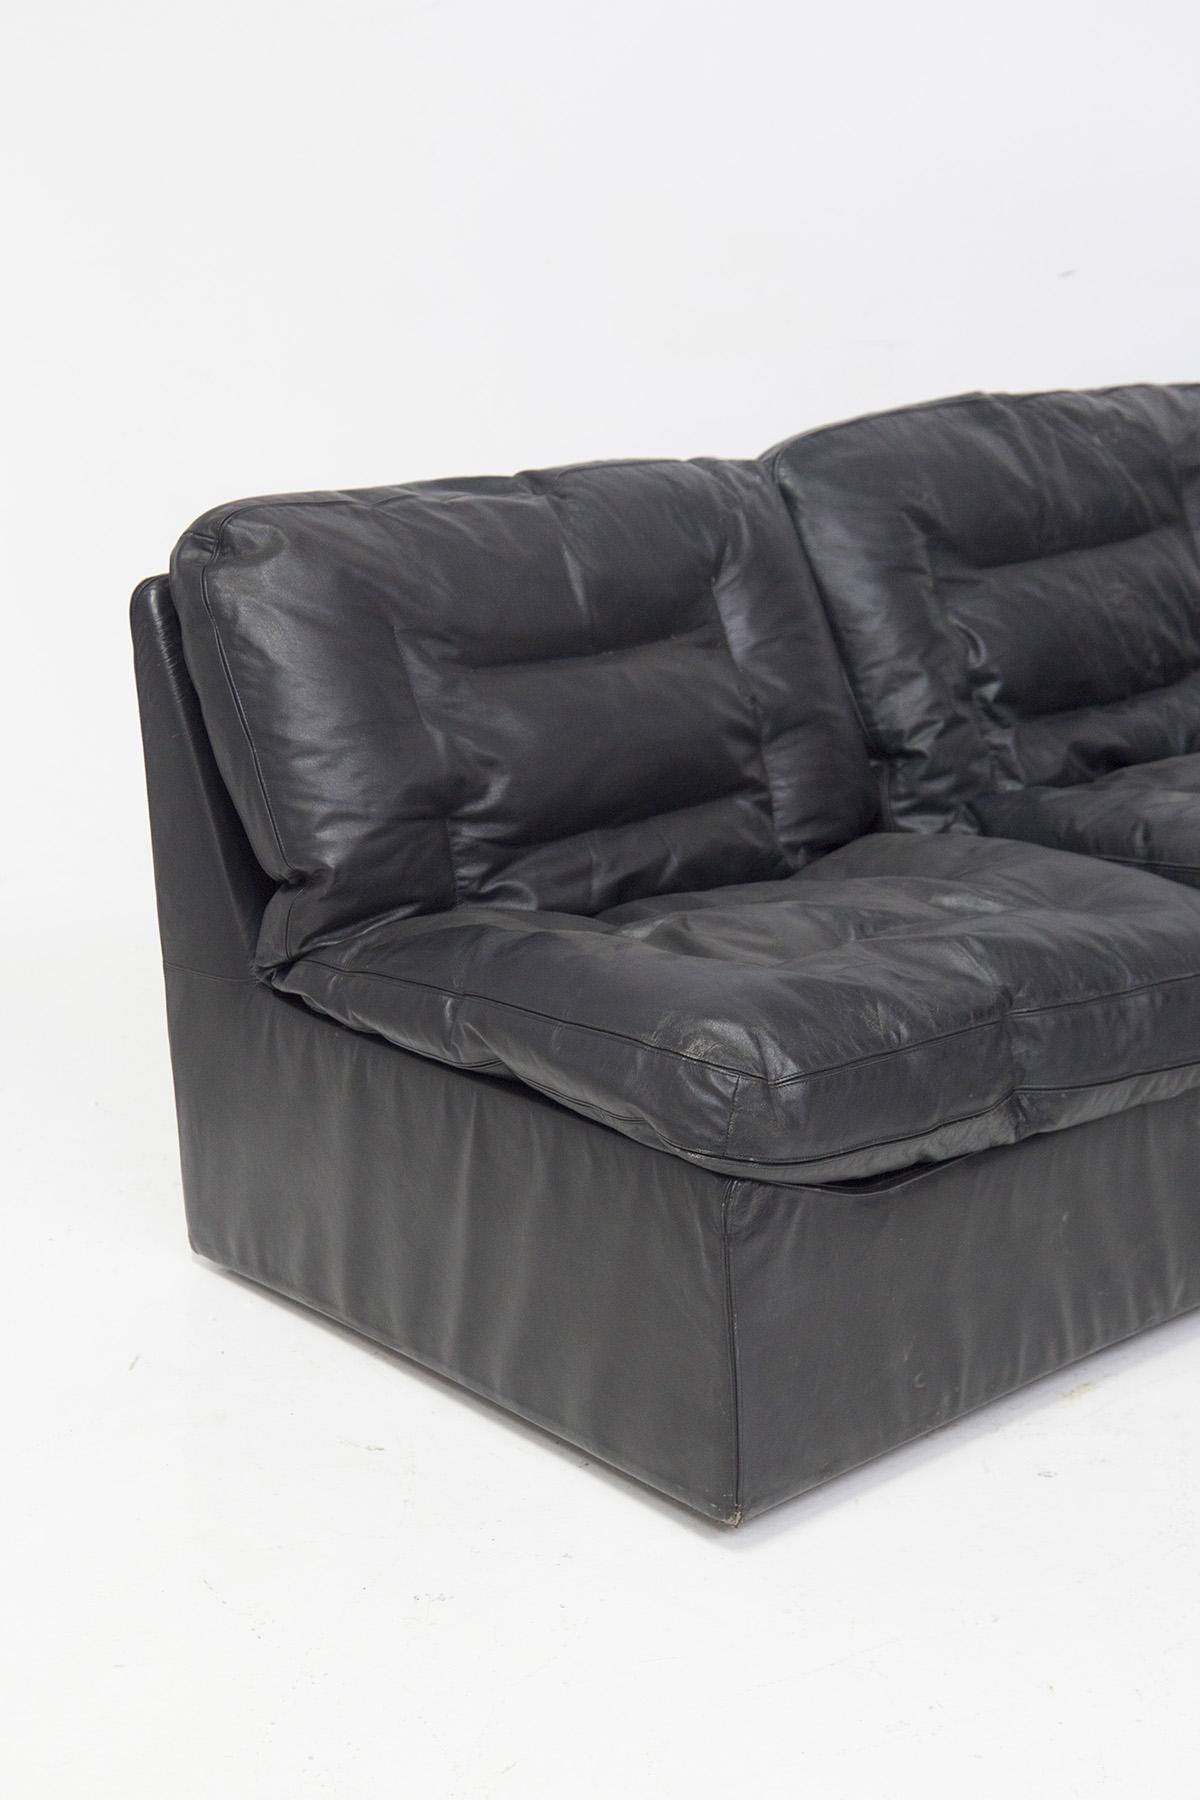 Beautiful sofa in black leather from the prestigious Italian manufacture Zanotta.
The sofa is designed for three seats, entirely made of soft and original black leather of the time, it is part of the 